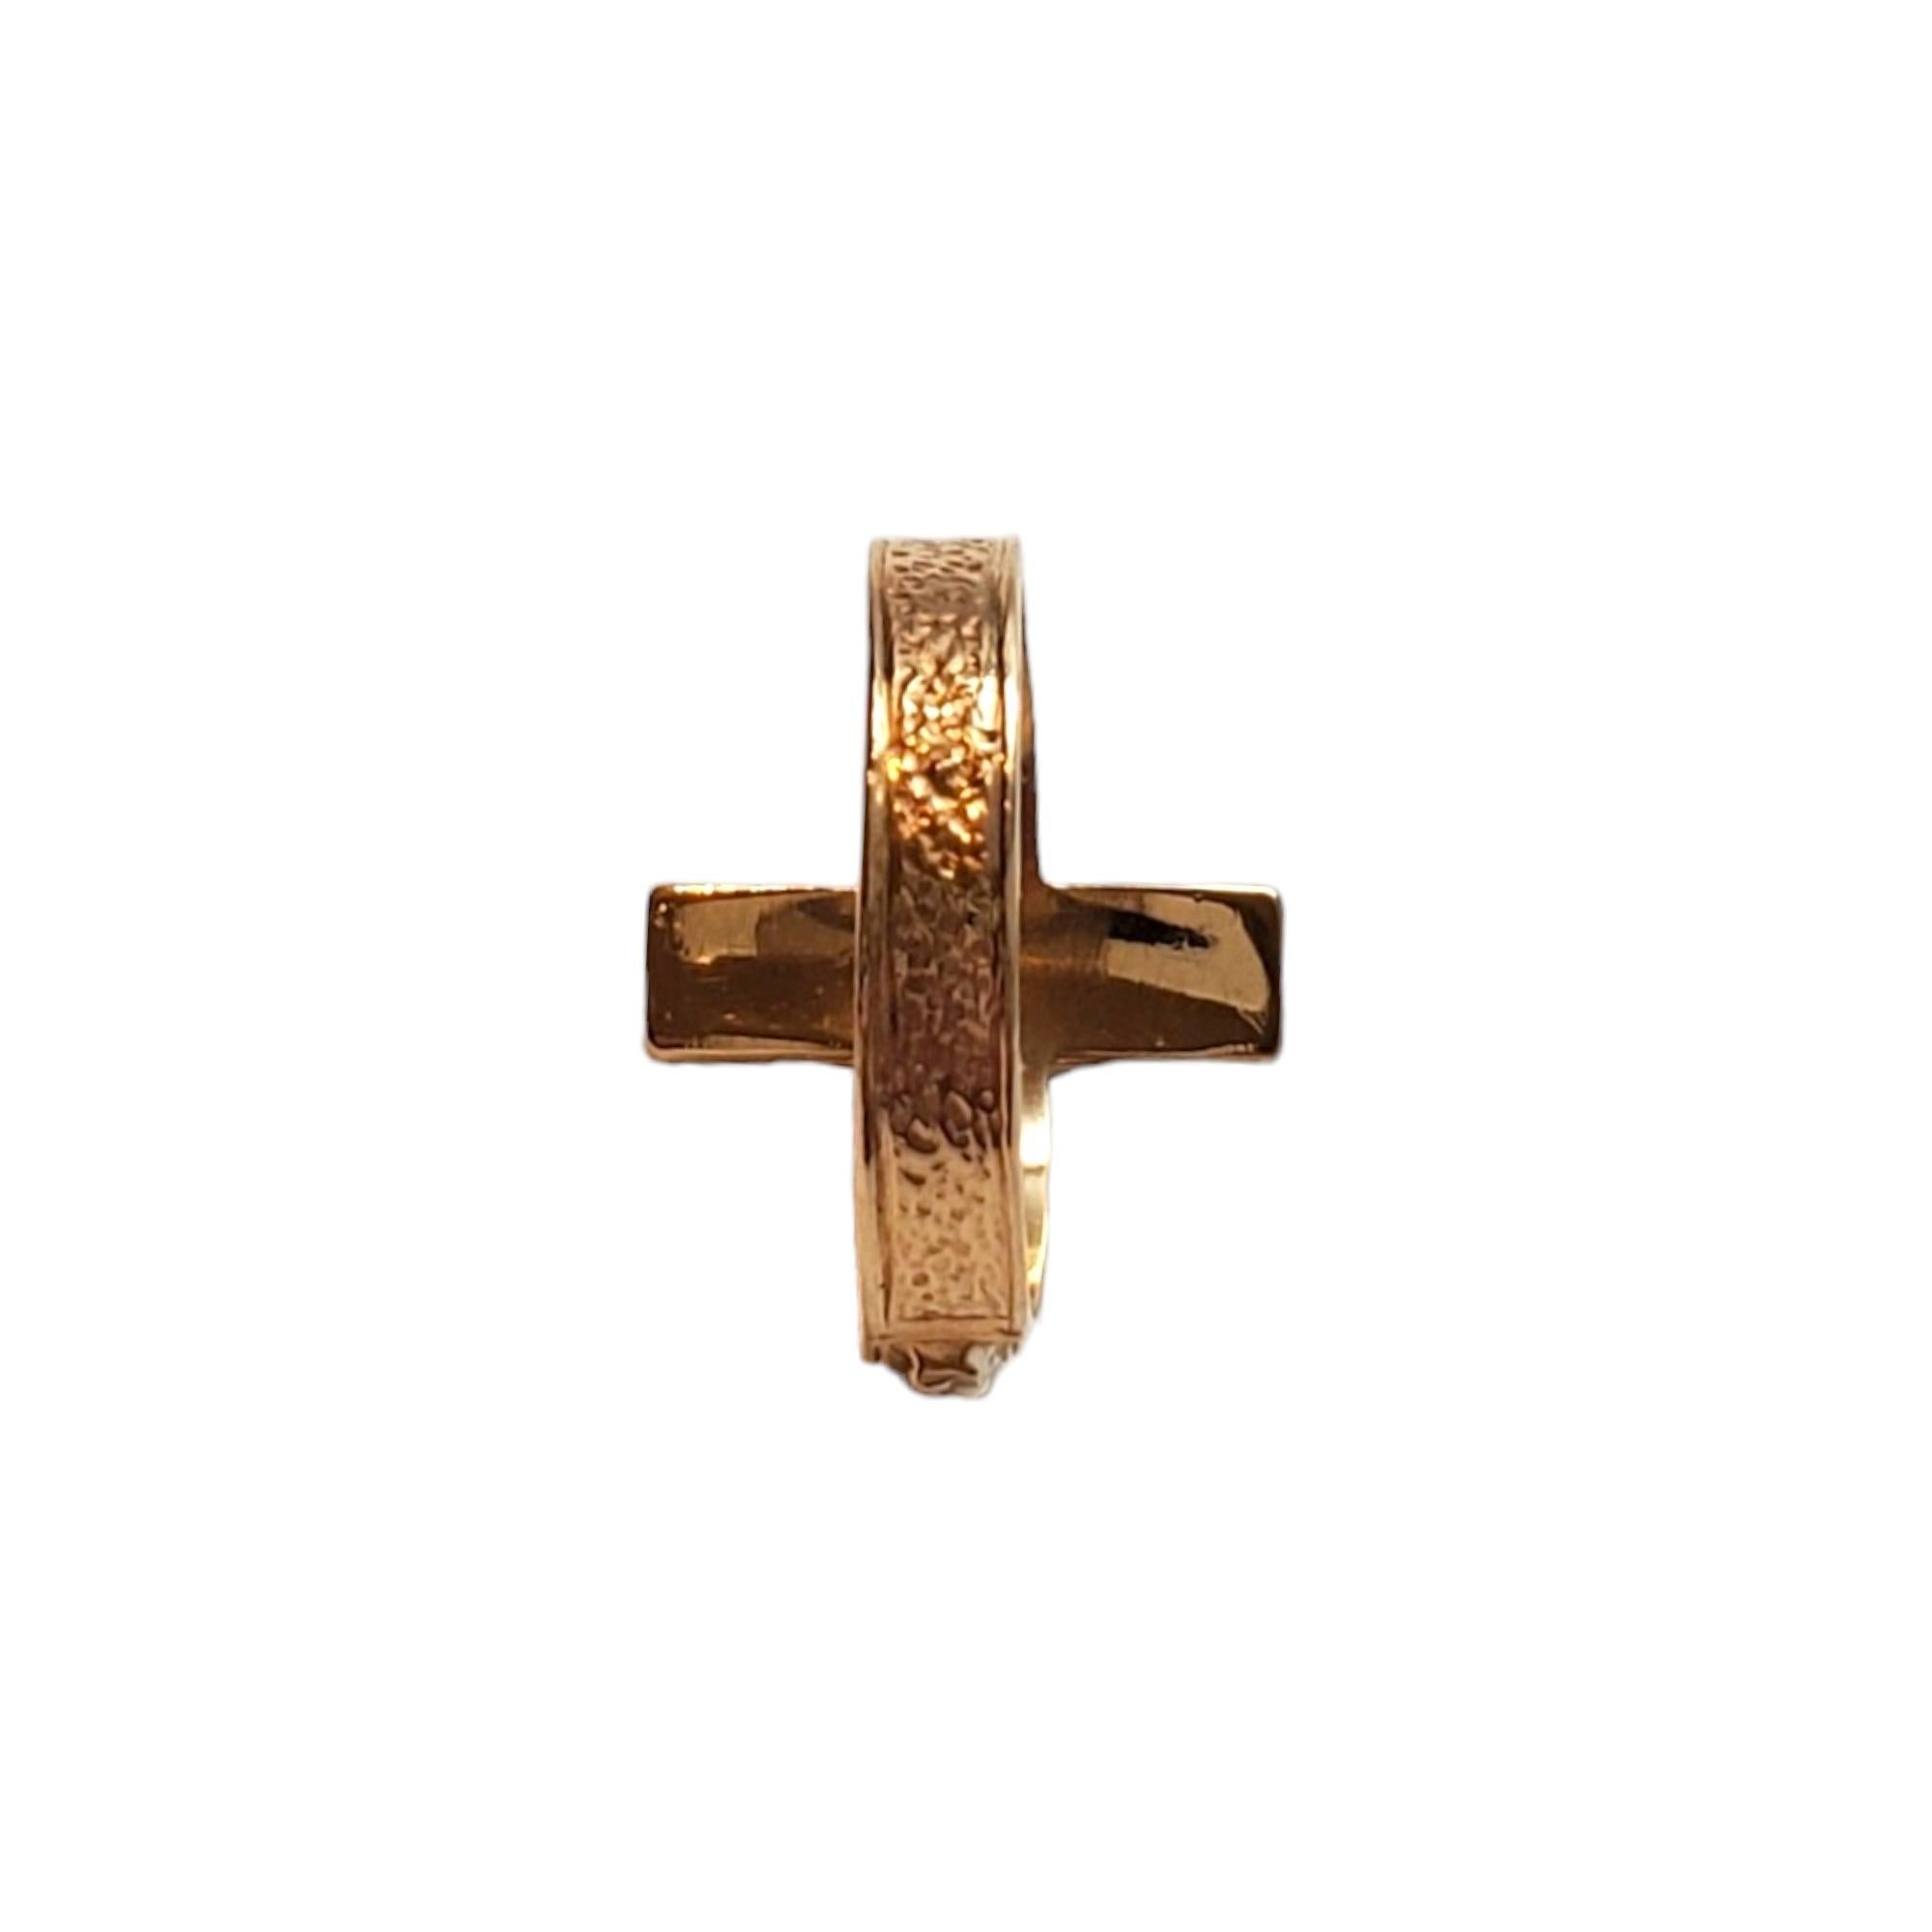 14K Yellow Gold Crucifix Ring

14K yellow gold ring with crucifix design horizontally.

Hallmark: 14K 

Weight: 2.4 g/ 1.5 dwt.

Ring Size: 4

Dimensions: 16.4 mm X 13.8 mm 3.1 mm

Very good condition, professionally polished.

Will come packaged in